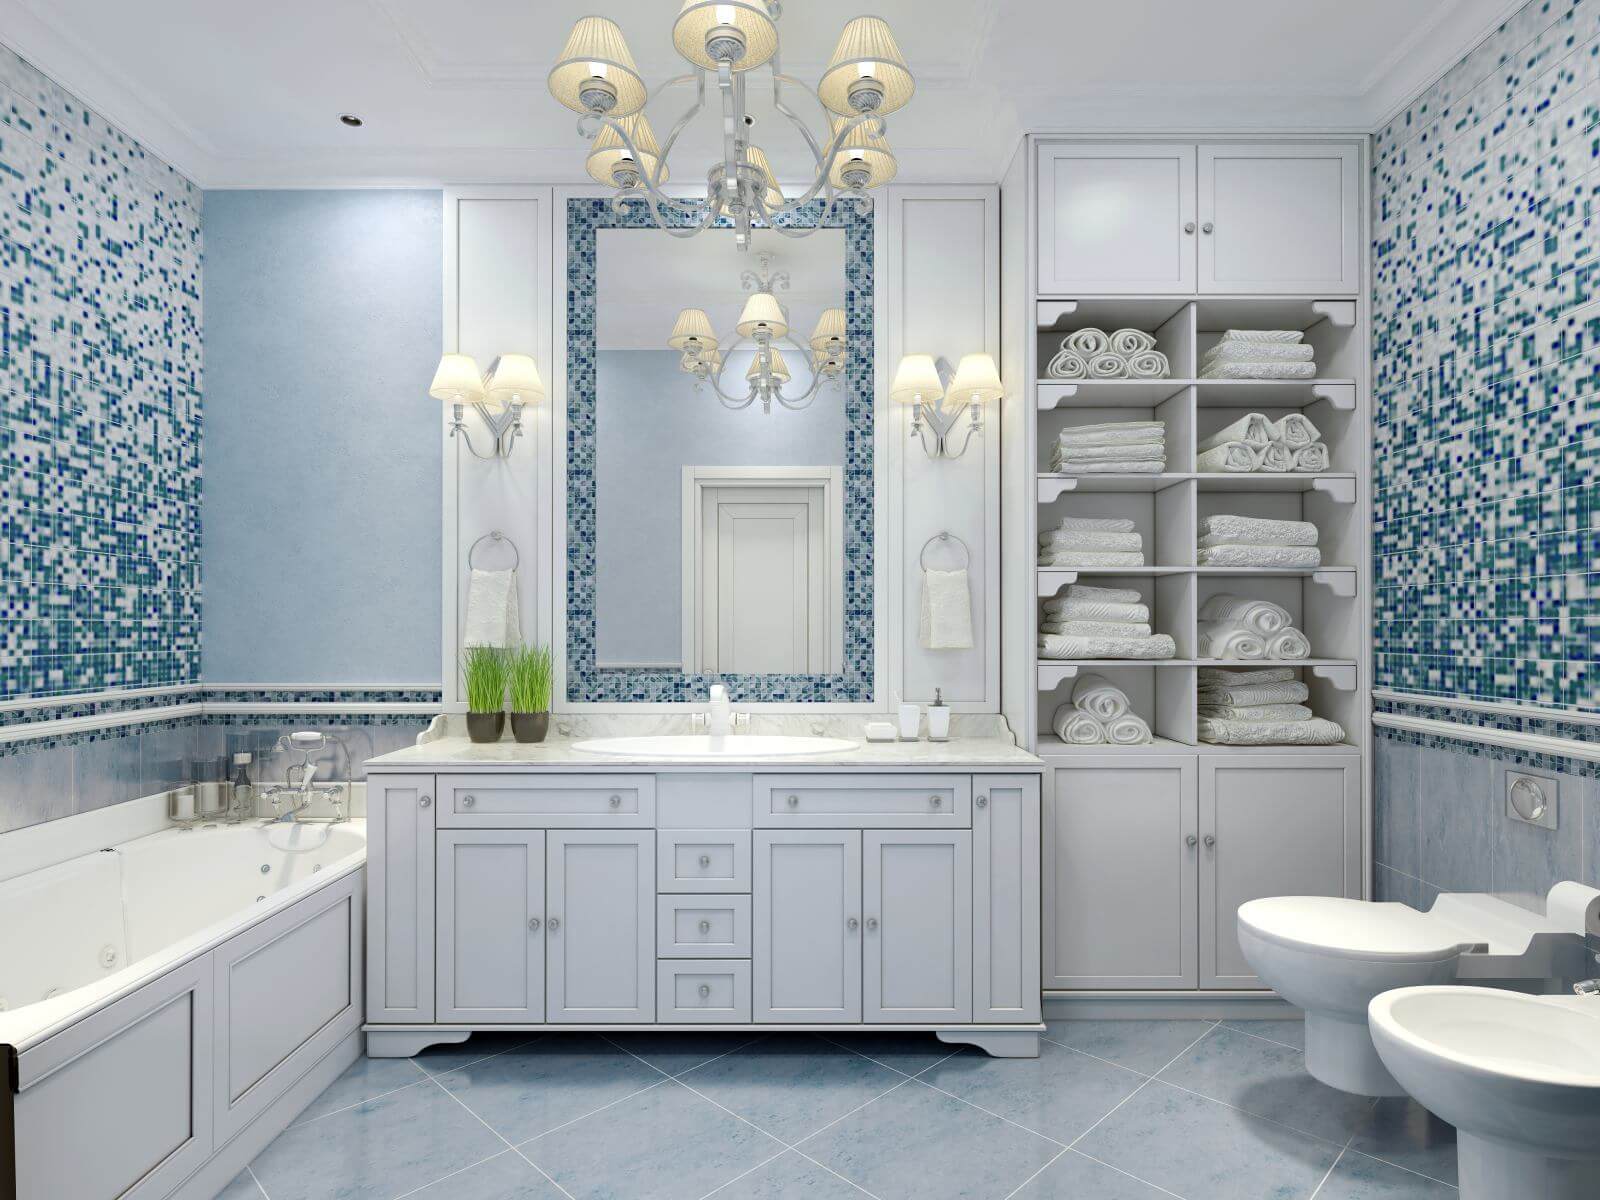 Furniture in classic blue bathroom. Blue colored bathroom with white furniture, great mirror with sconces and luxurious chandelier. Mix of tiles and textured plaster on walls pleasing to the eye. 3D render